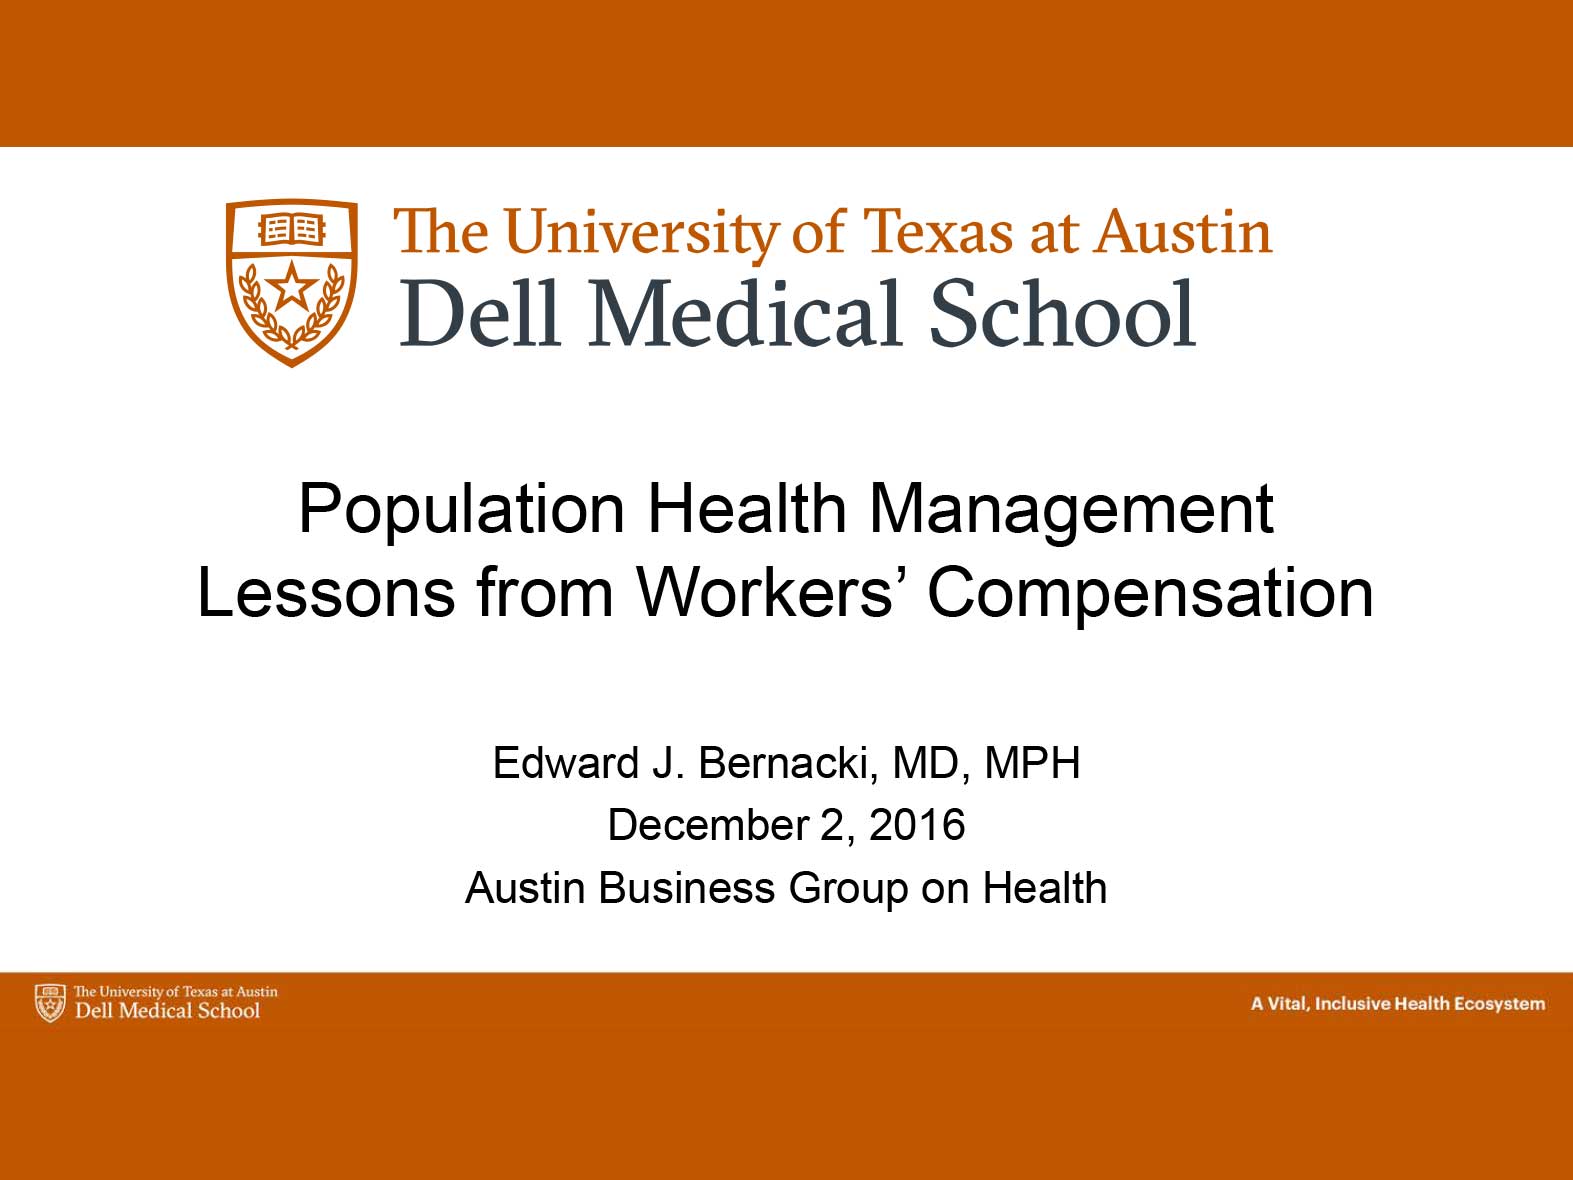 Population Health Management Lessons from Workers’ Compensation